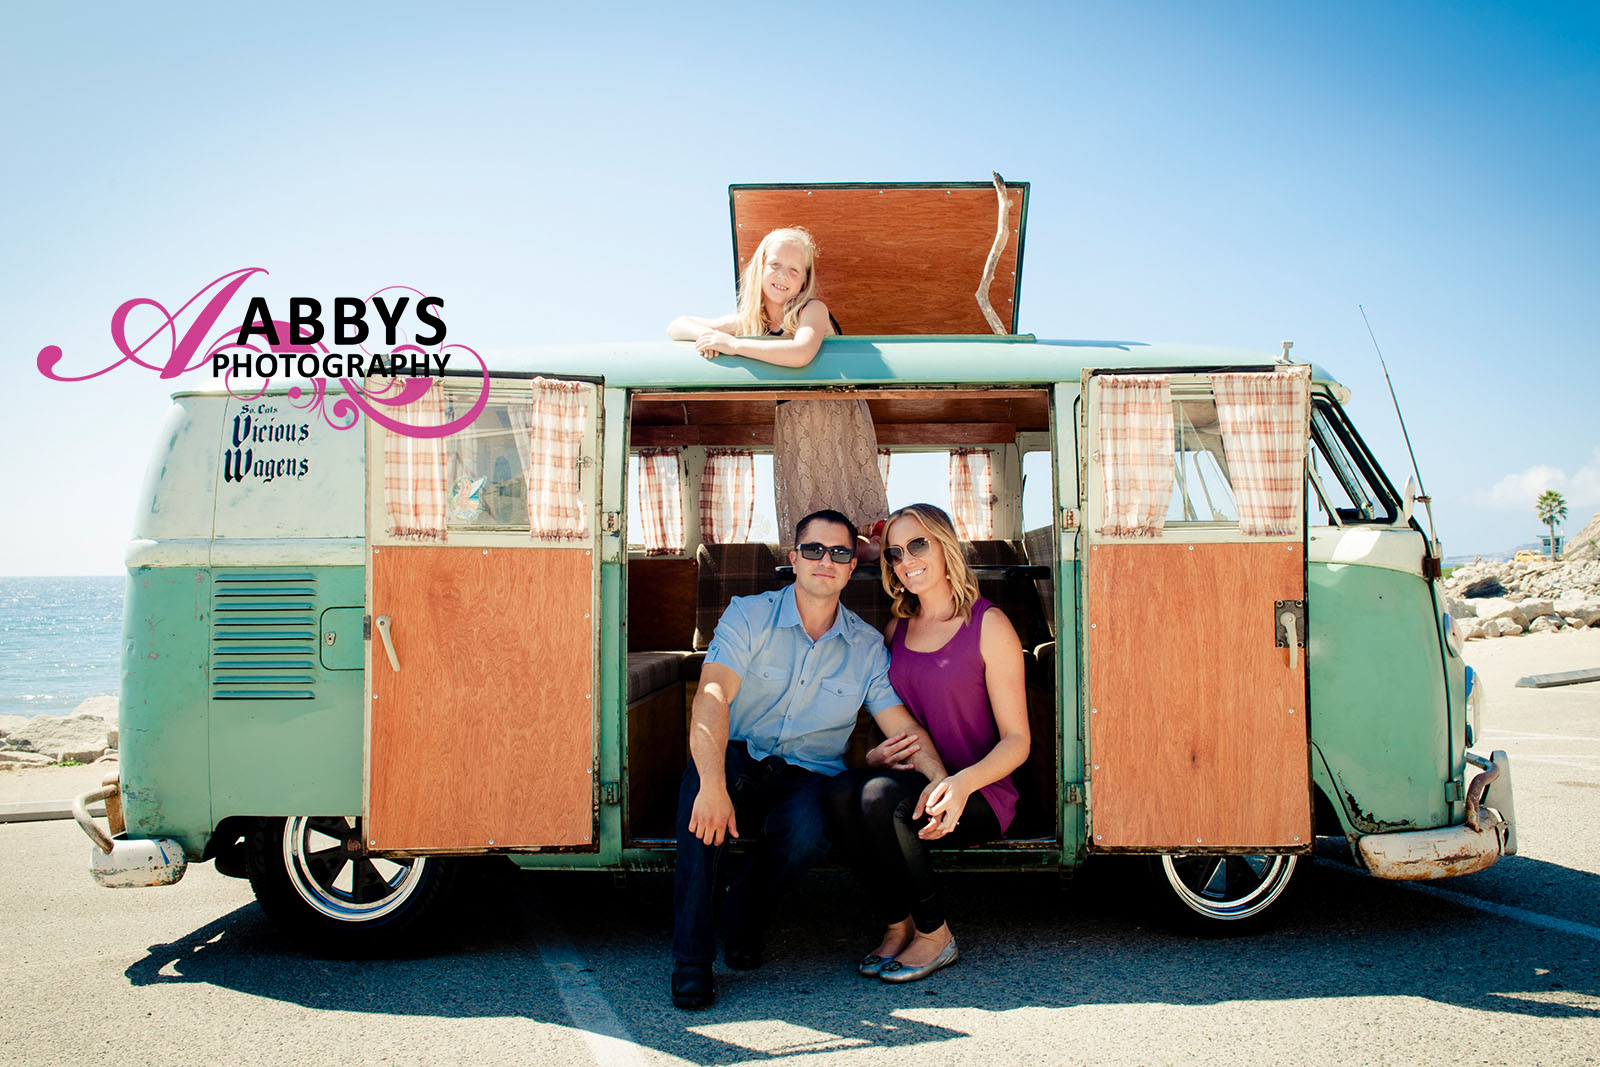  Engagement photography can include the entire family, and the location could be the beach or Bakersfield.